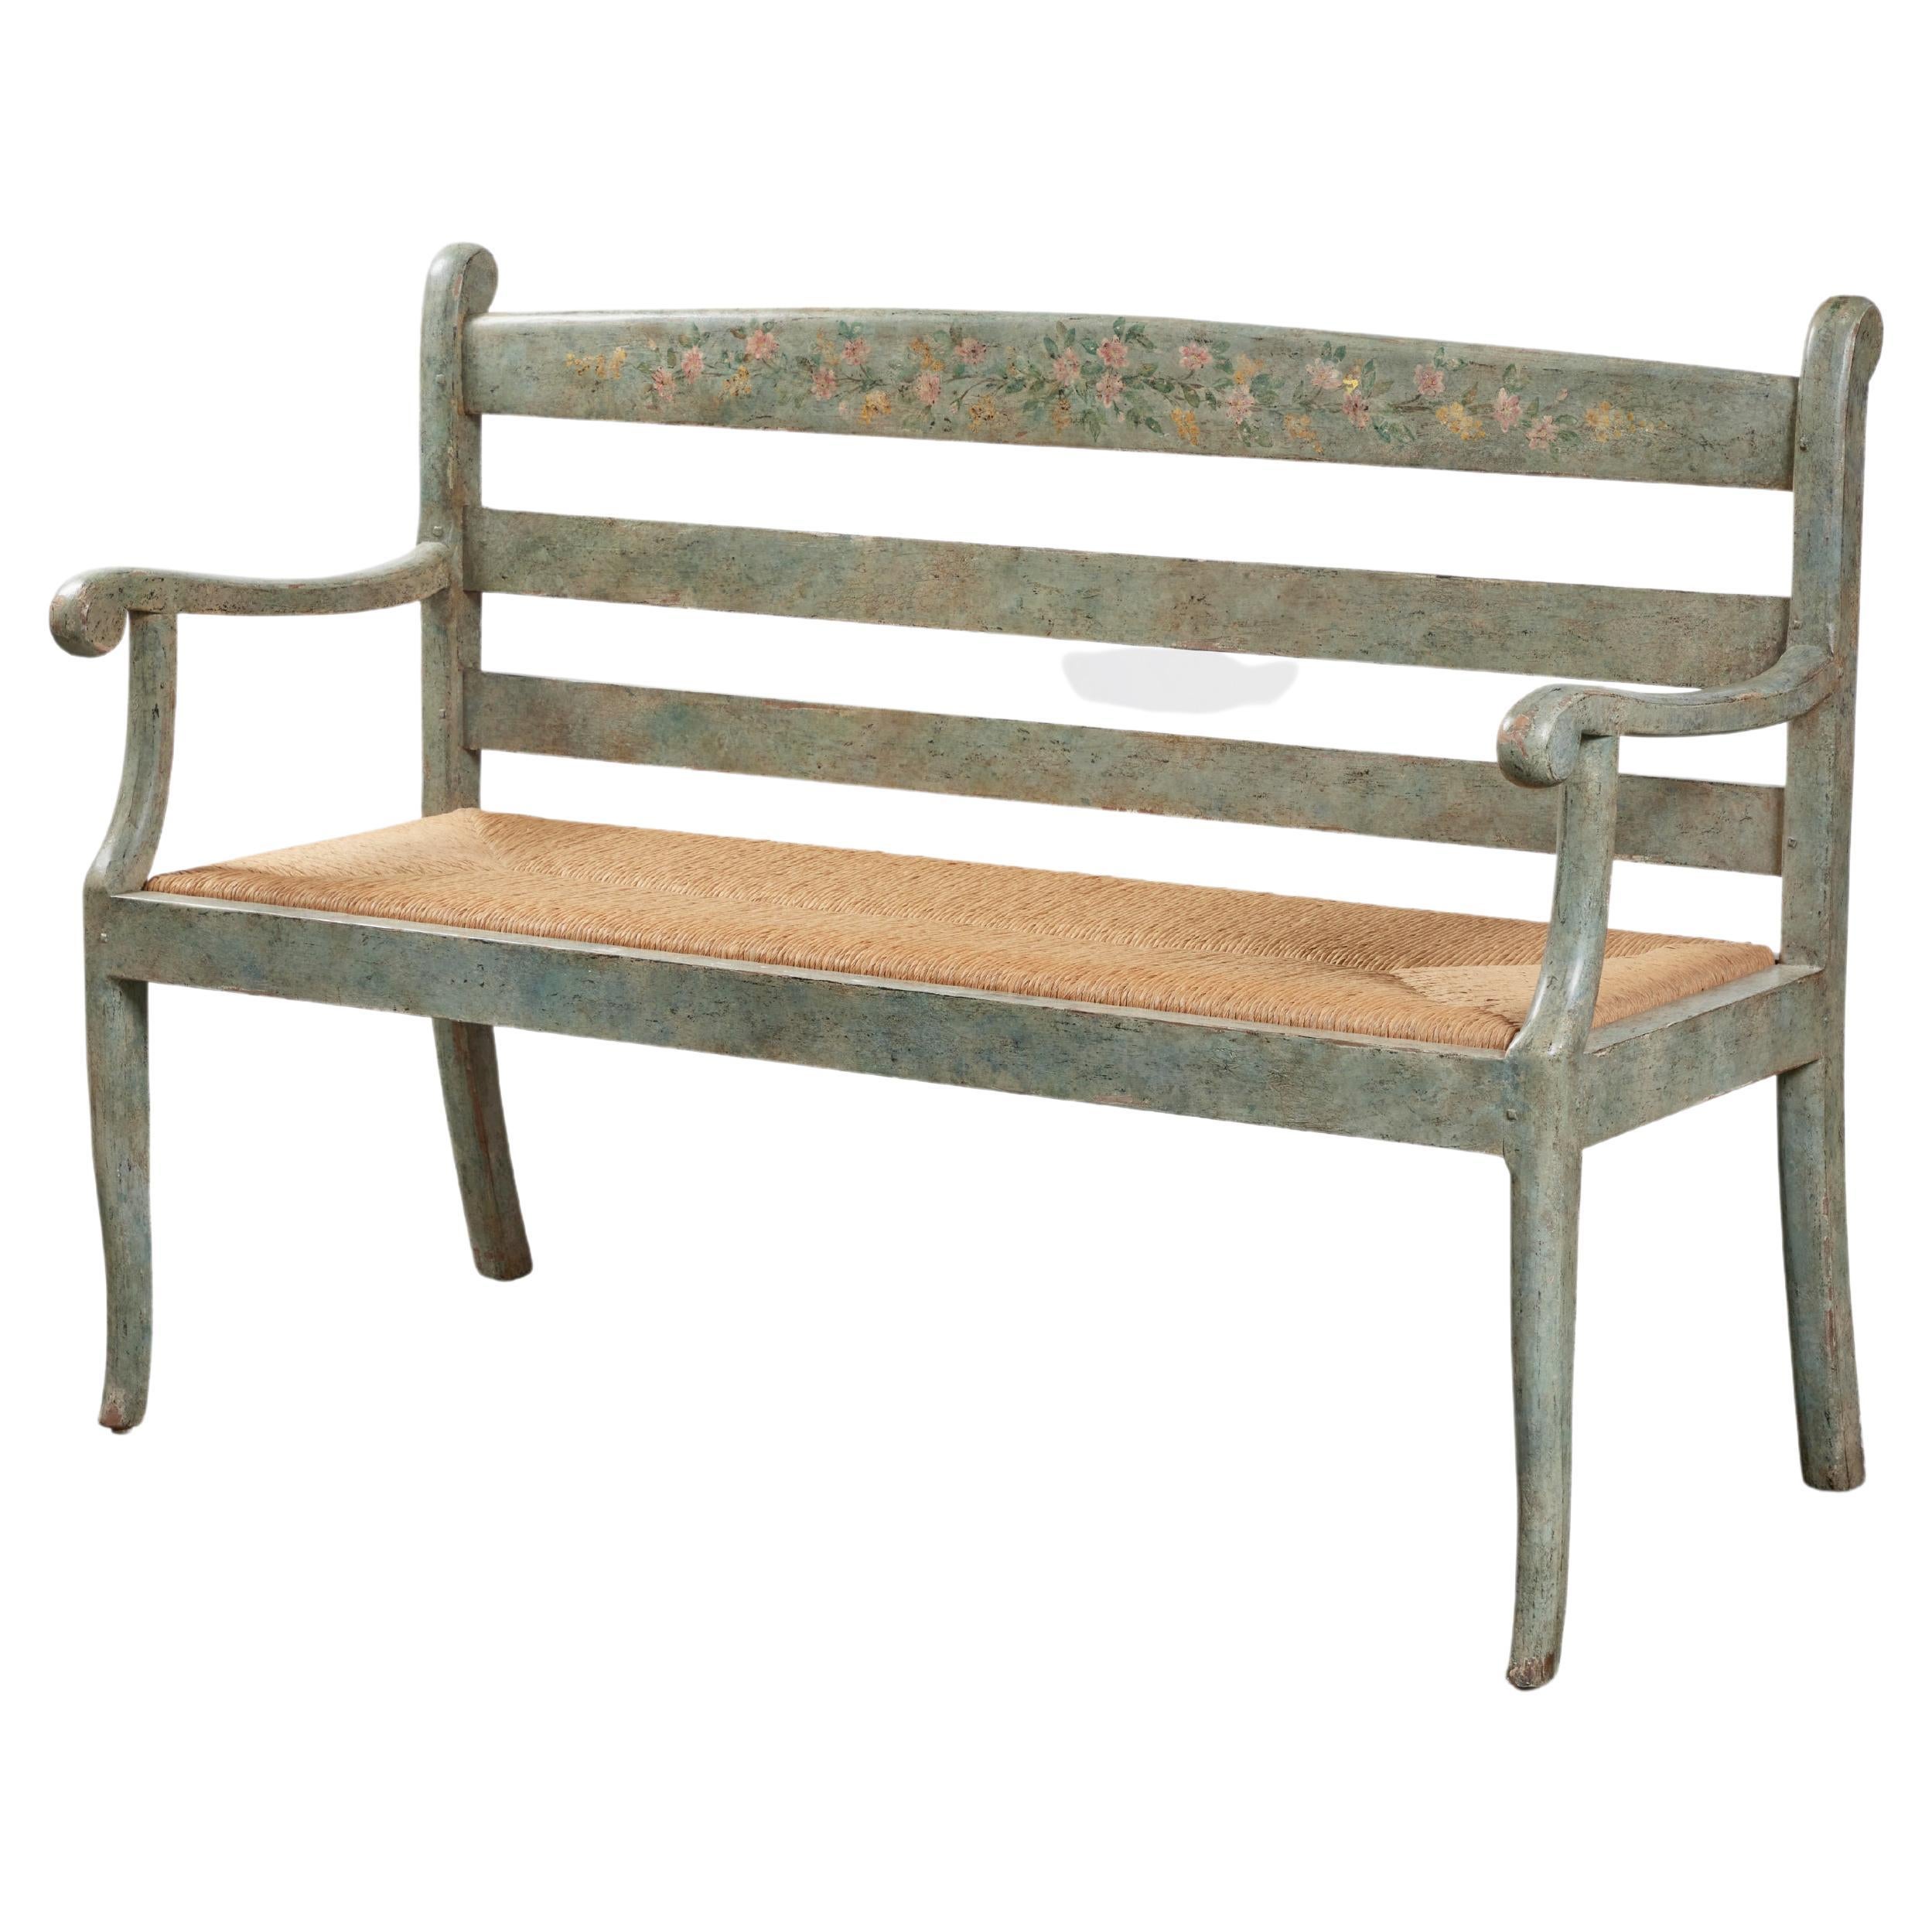 Painted Floral French Provincial Style Wooden Bench with Wicker Seat